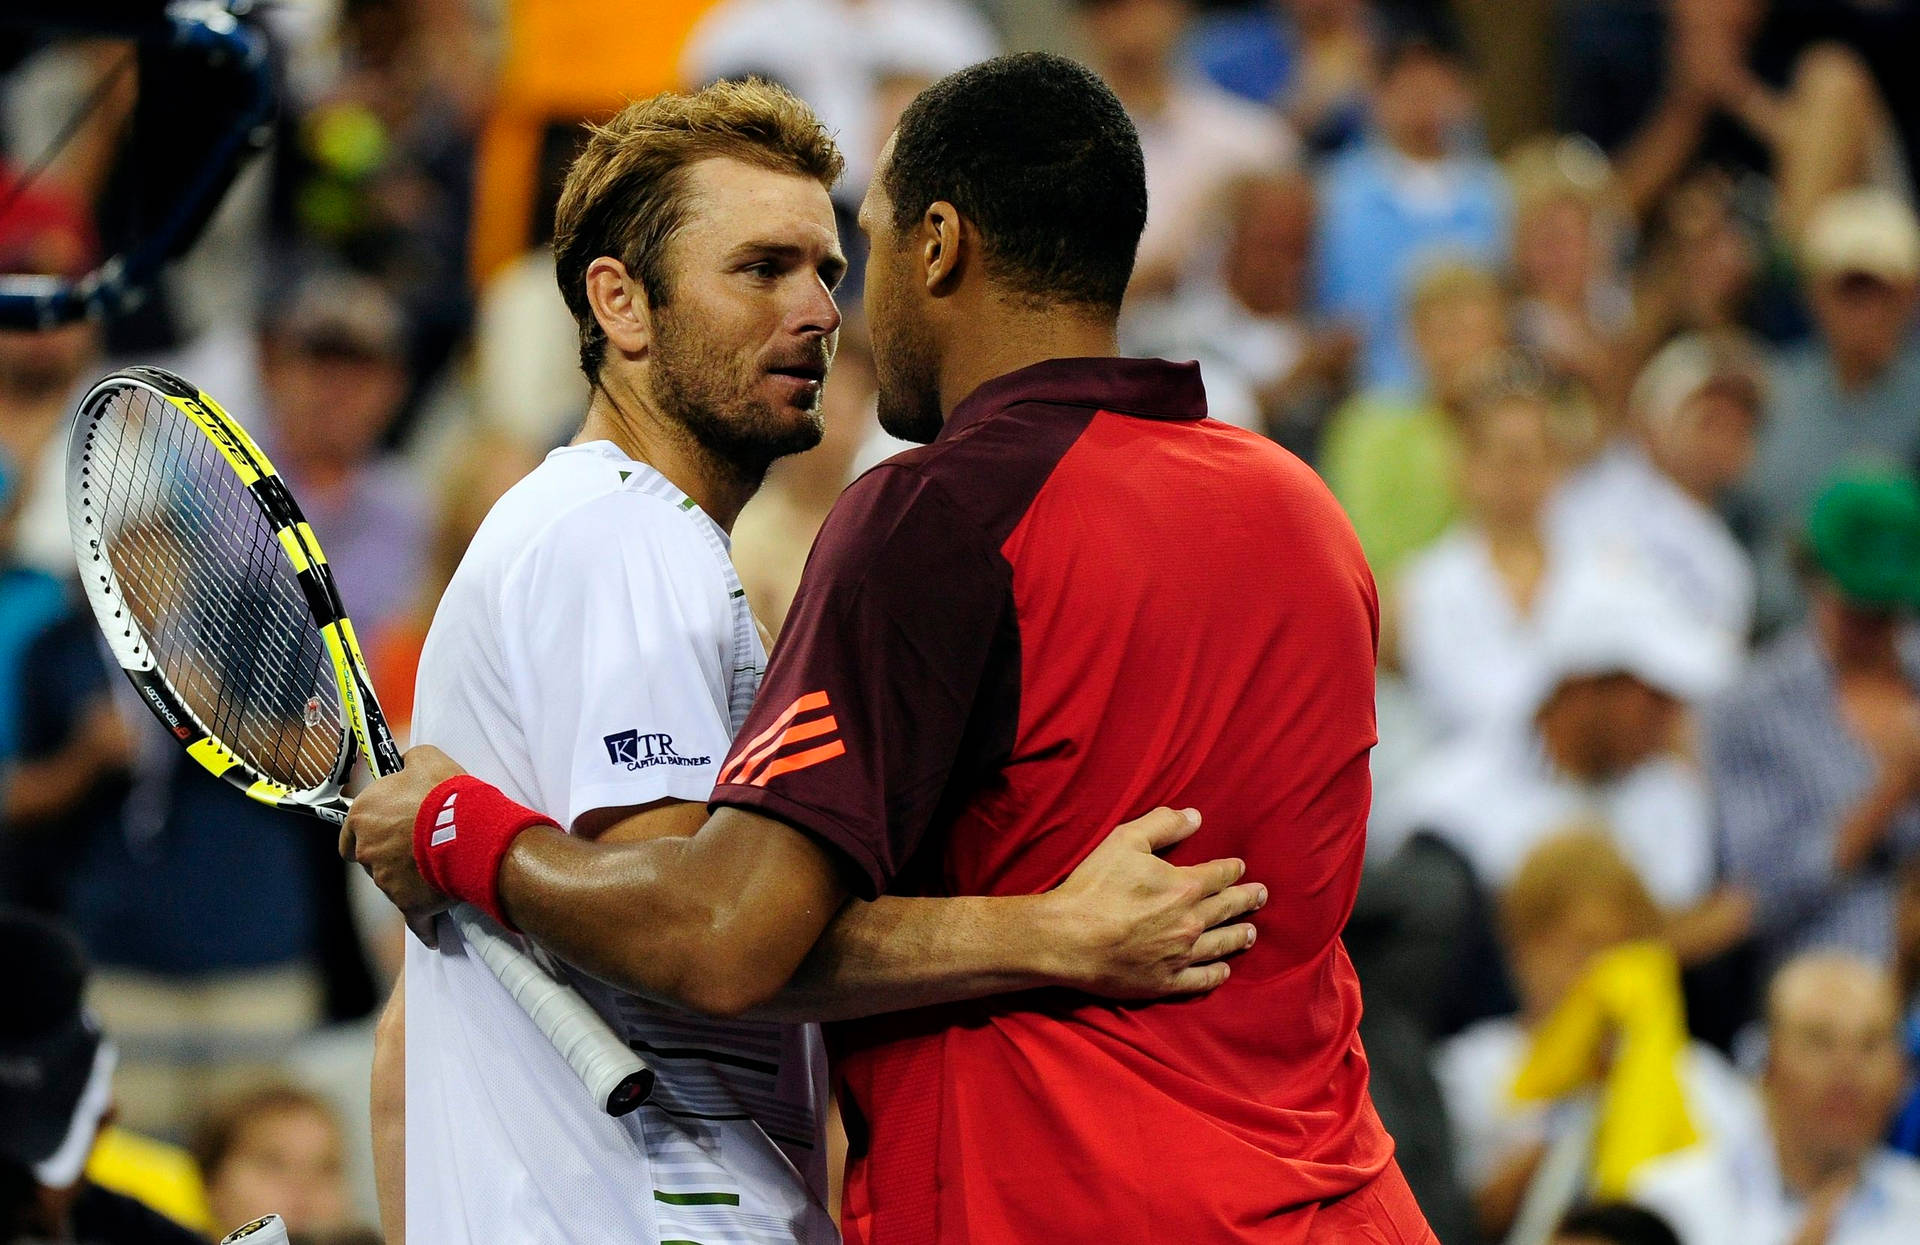 Jo-Wilfried Tsonga Embracing His Opponent After a Tennis Match Wallpaper